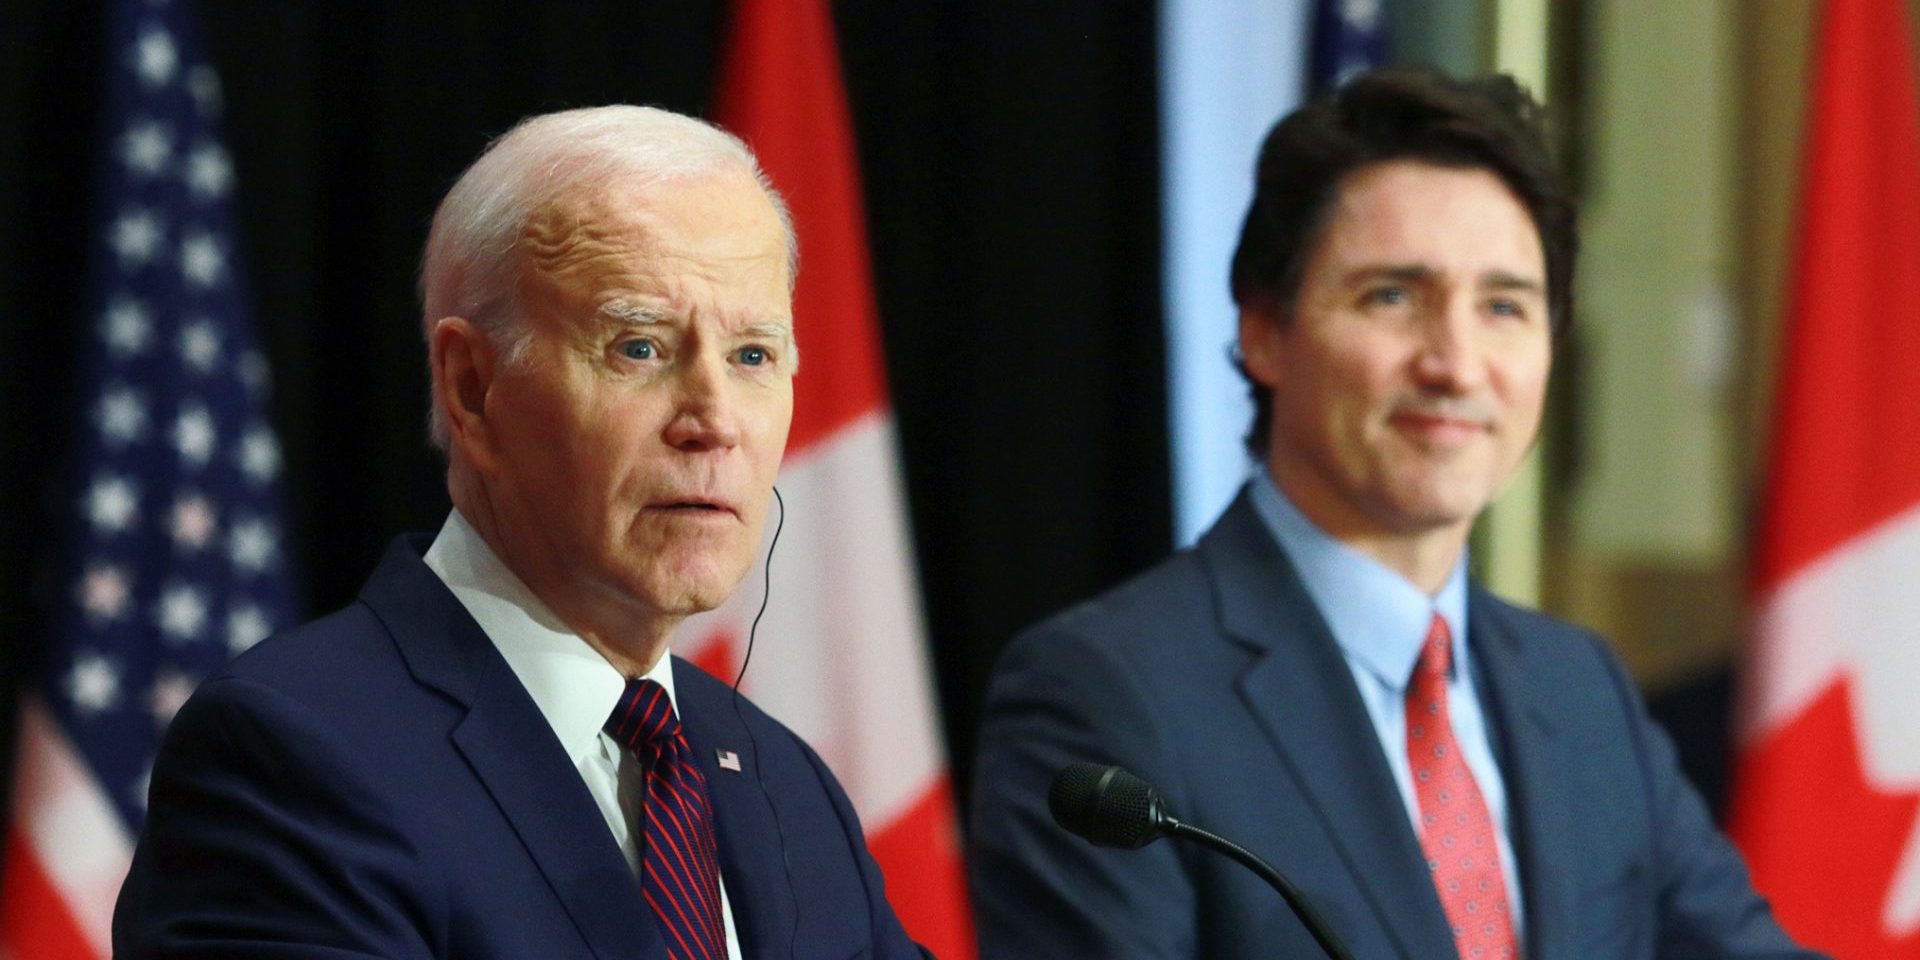 Official visit of the president of US to Ottawa. March 24, 2023.   Media availability at the Sir John A Macdonald building. US president Joe Biden and PM Justin Trudeau. The Hill Times photograph by Sam Garcia